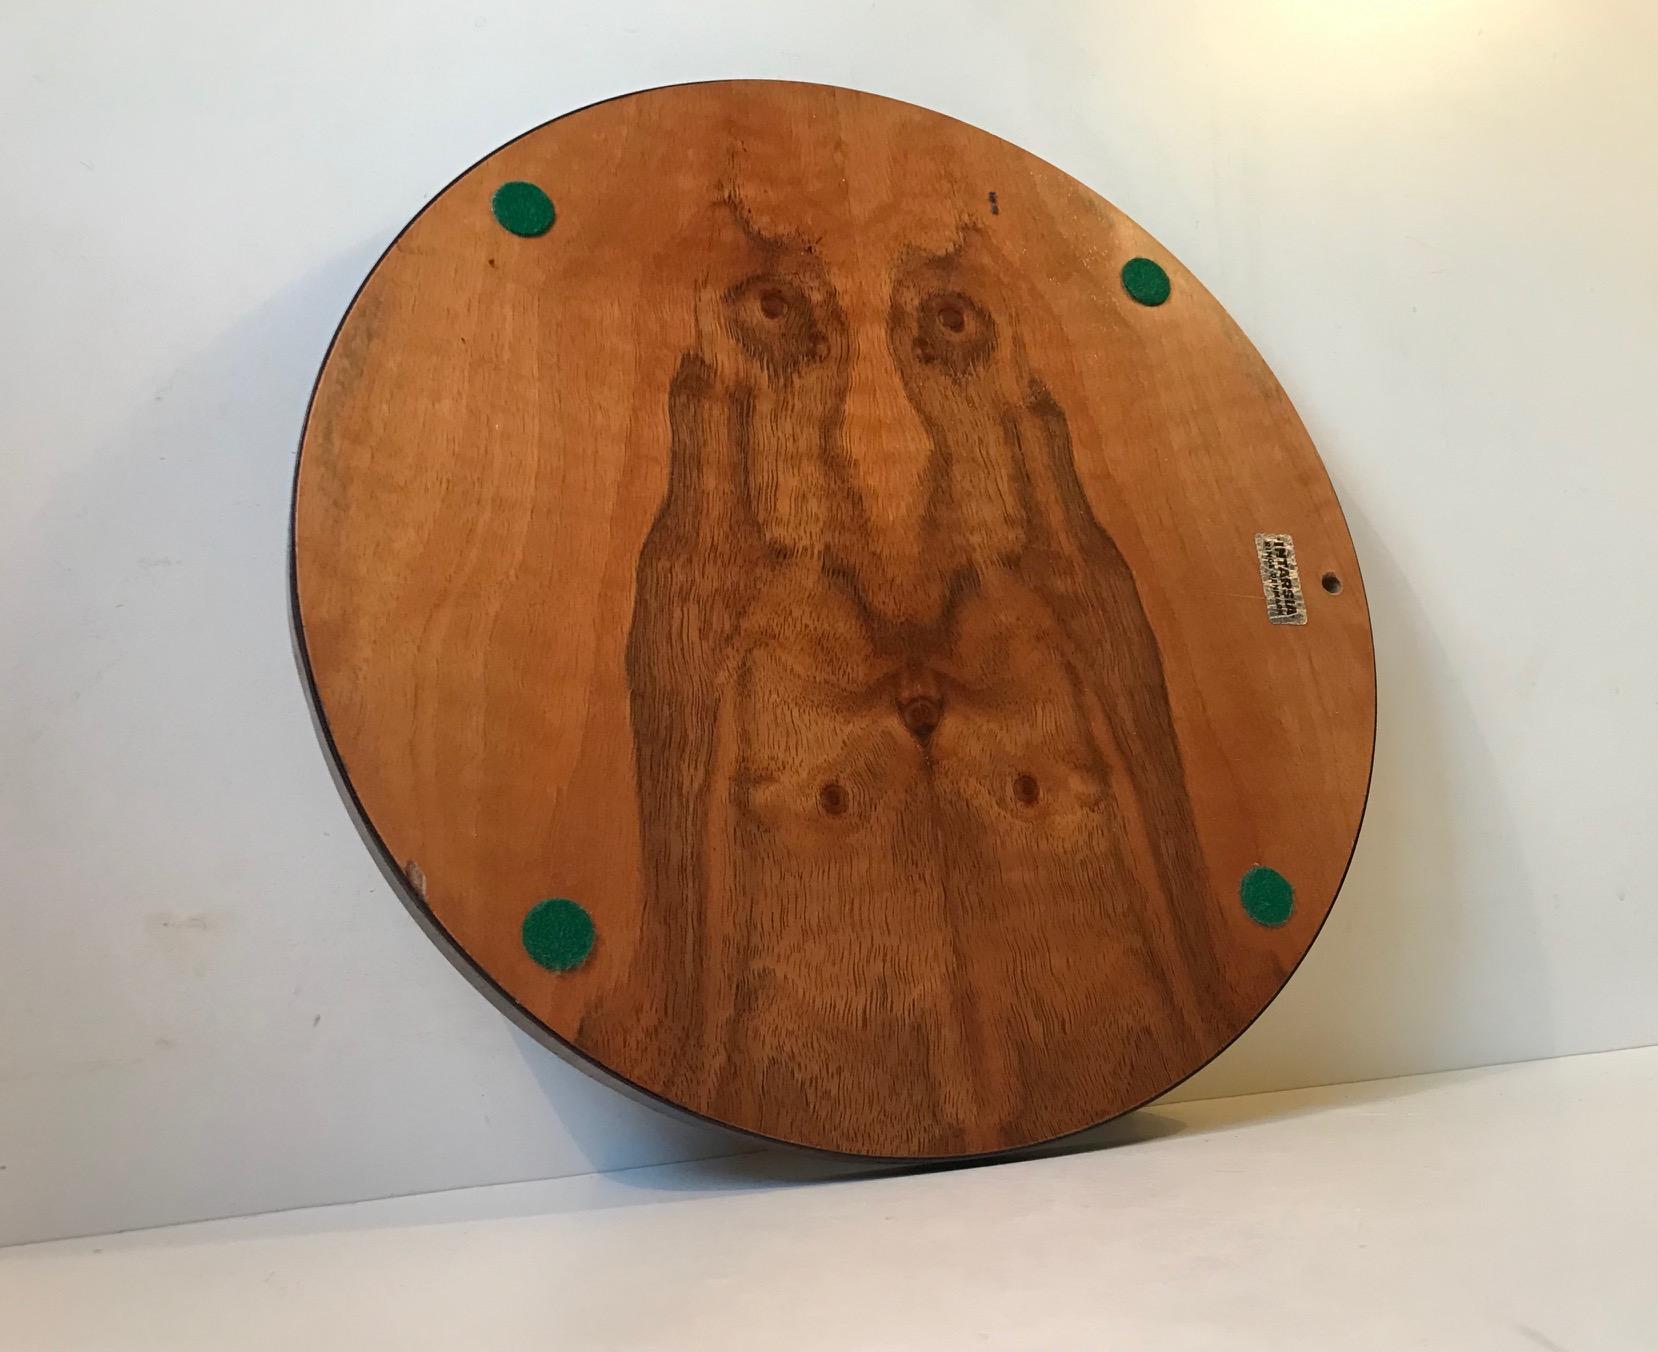 Whats unusual about this midcentury tray from Intarsia - Ringe is not so much the delicate mixed woods floral intarsia to its frontside but the balanced yet natural grain 'motif' to its backside. Whether or not it resembles Jesus or Santa Claus